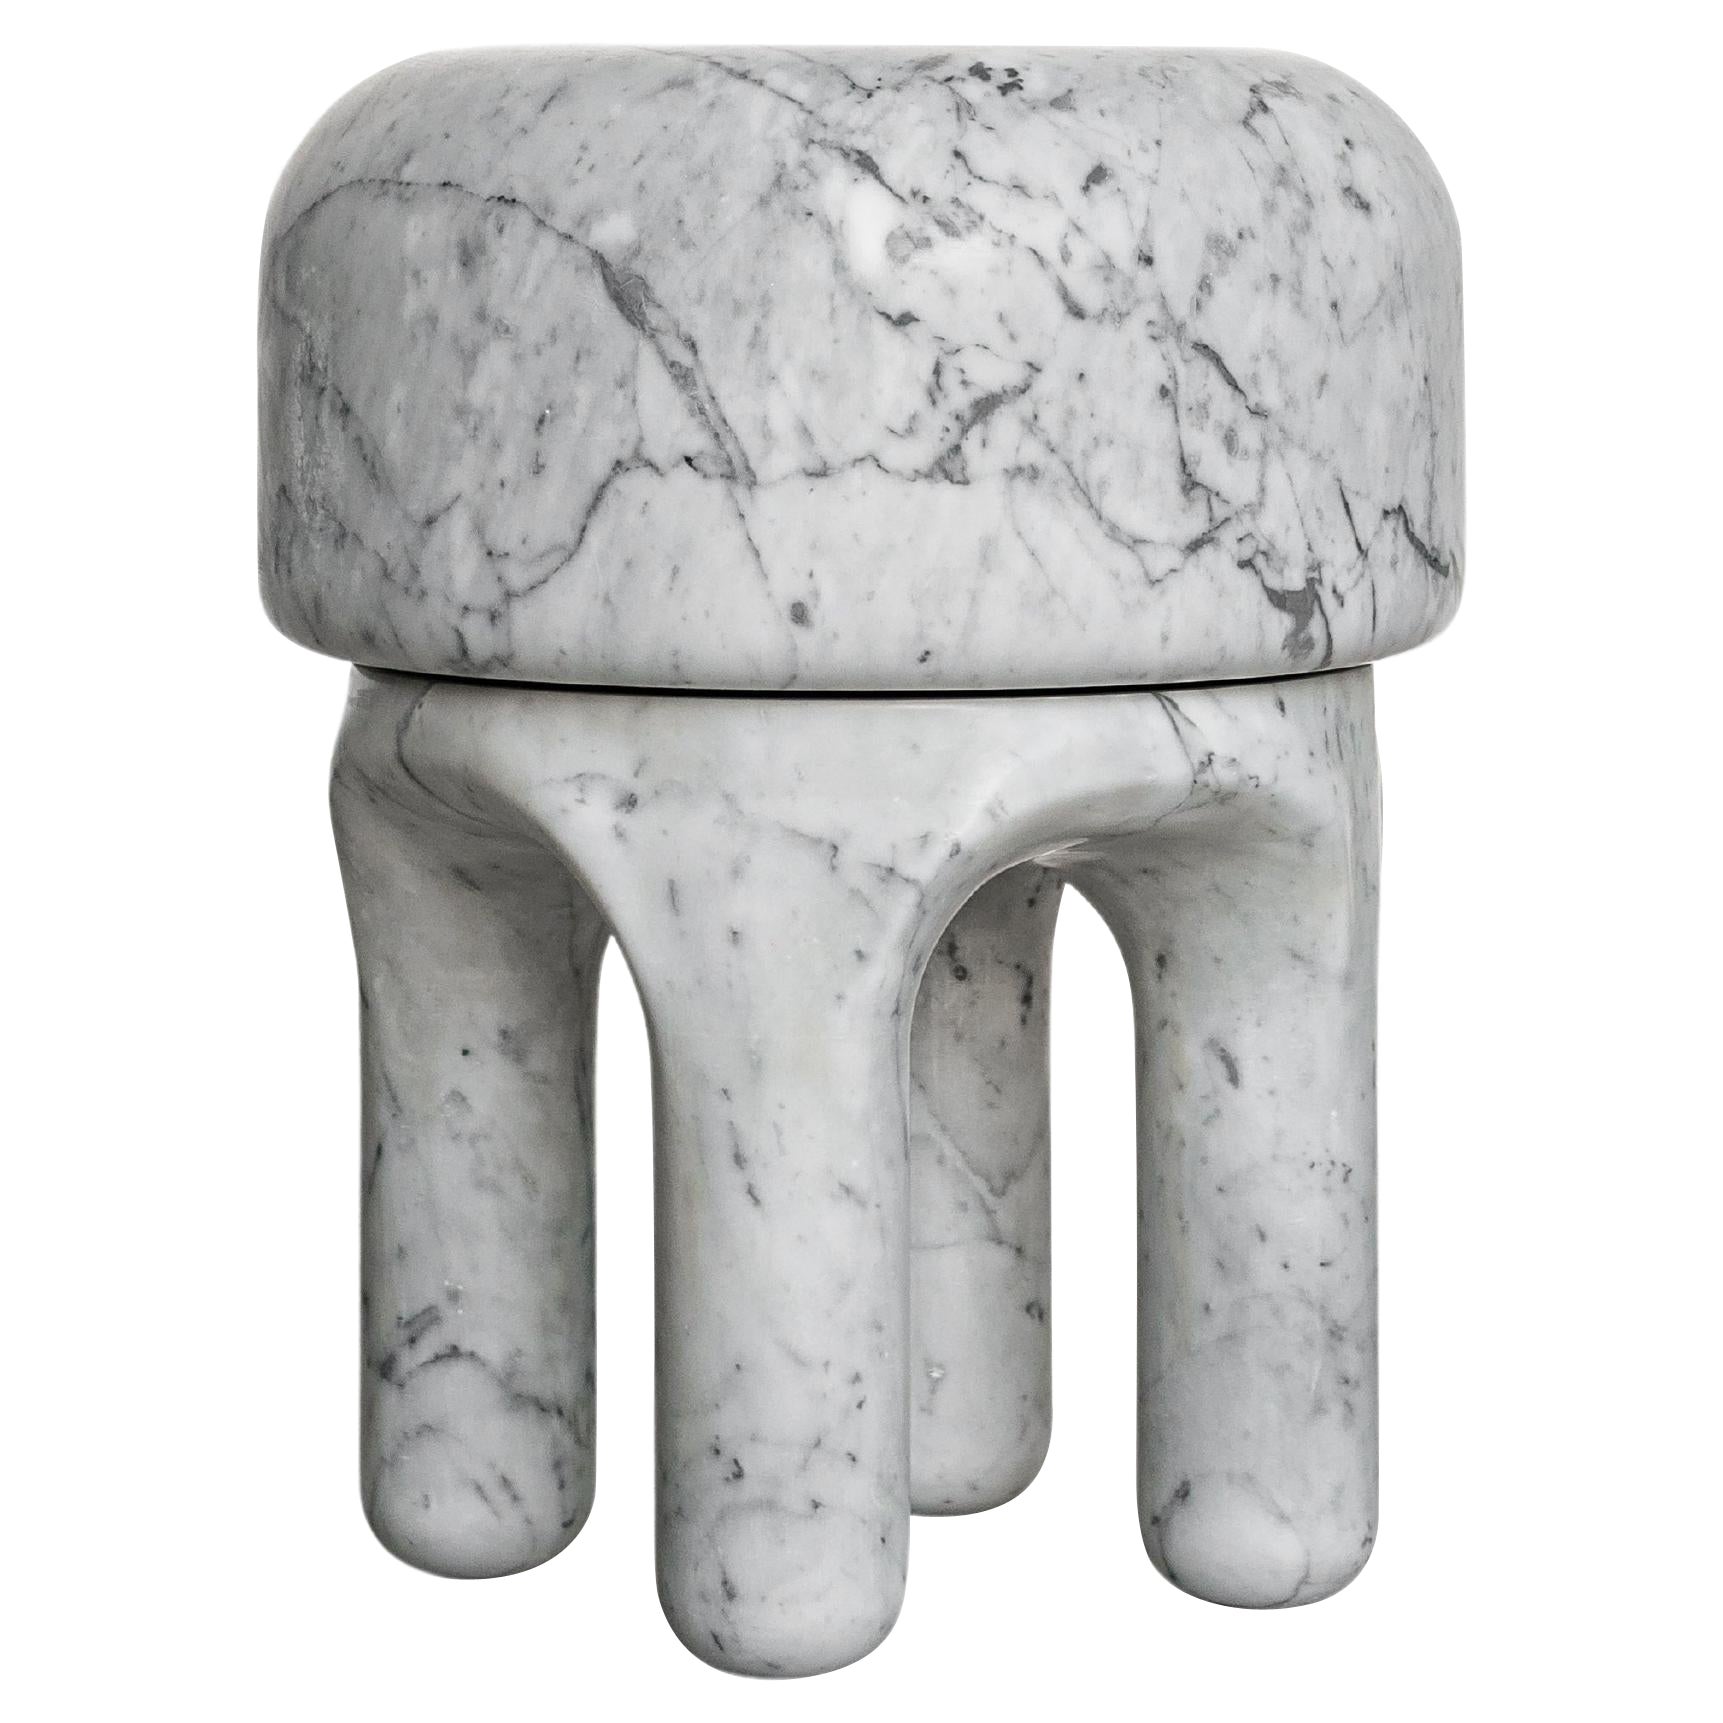 White Carrara Marble Side Table - Collectible Italian Design For Sale